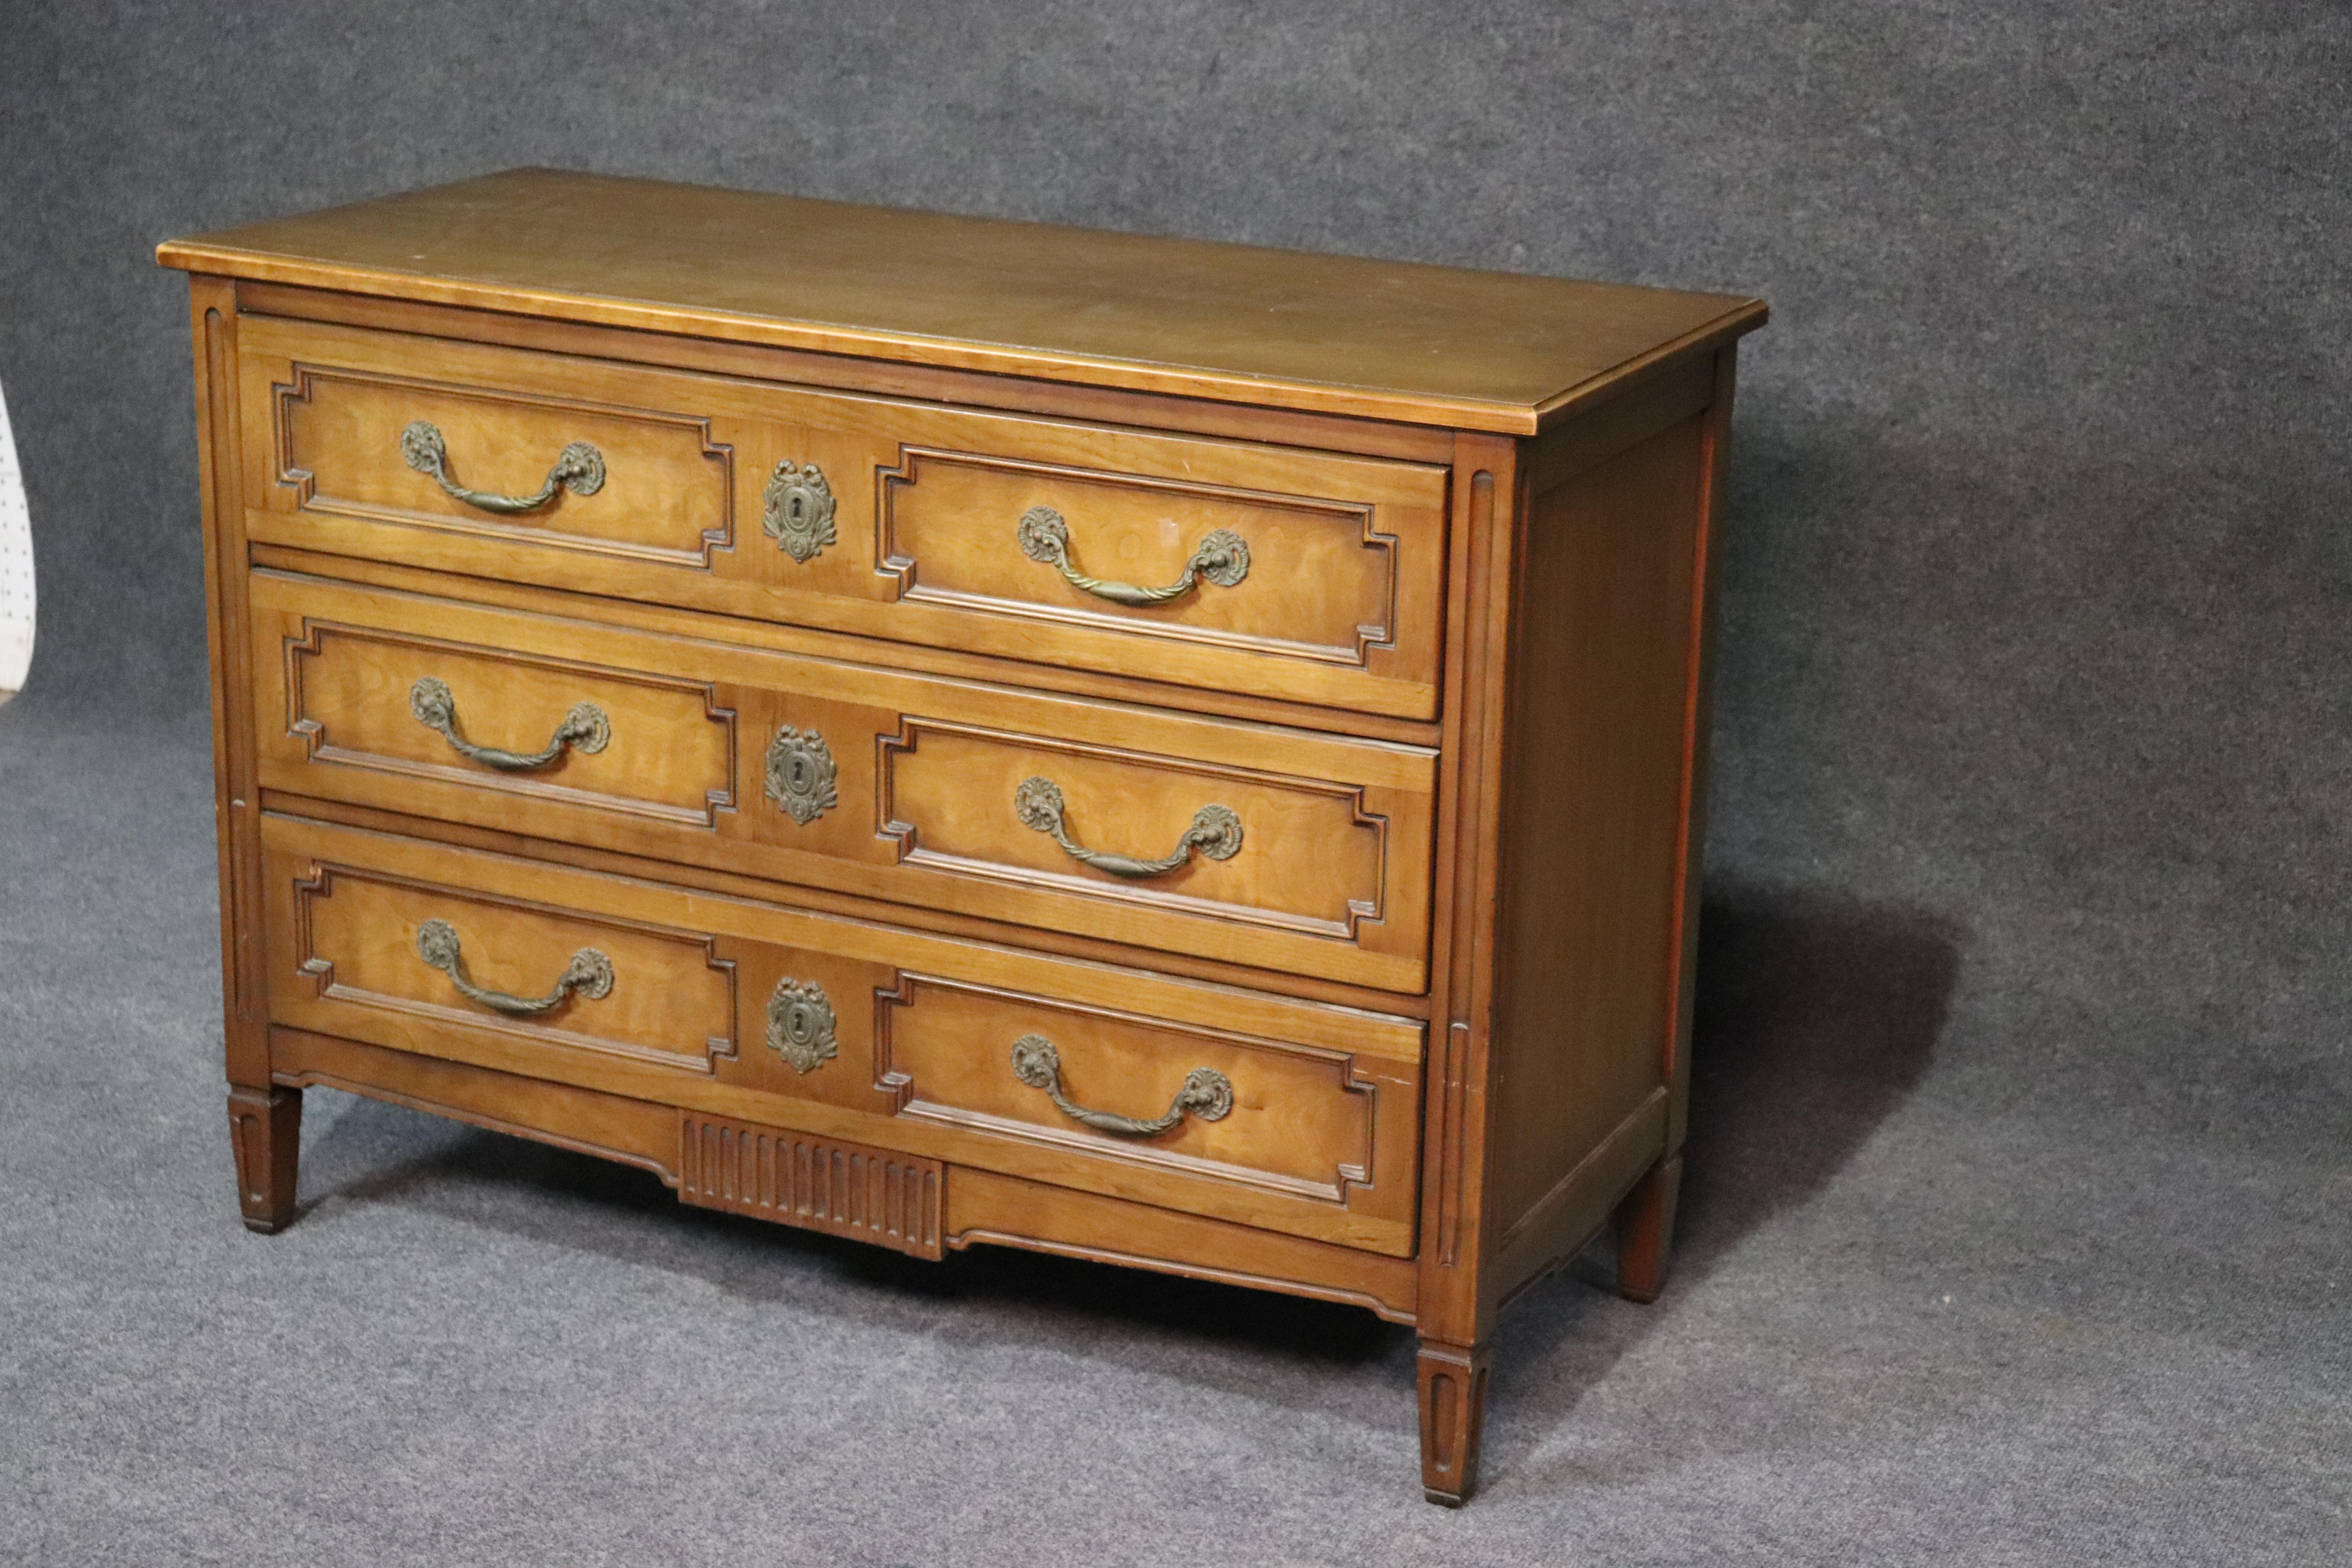 This is a simple and yet sophisticated Henredon Louis XVI style commode. Easily used as a dresser, foyer chest or commode, this piece can be placed in any room in your home and won't overwhelm it at the same time. The piece can be painted and the